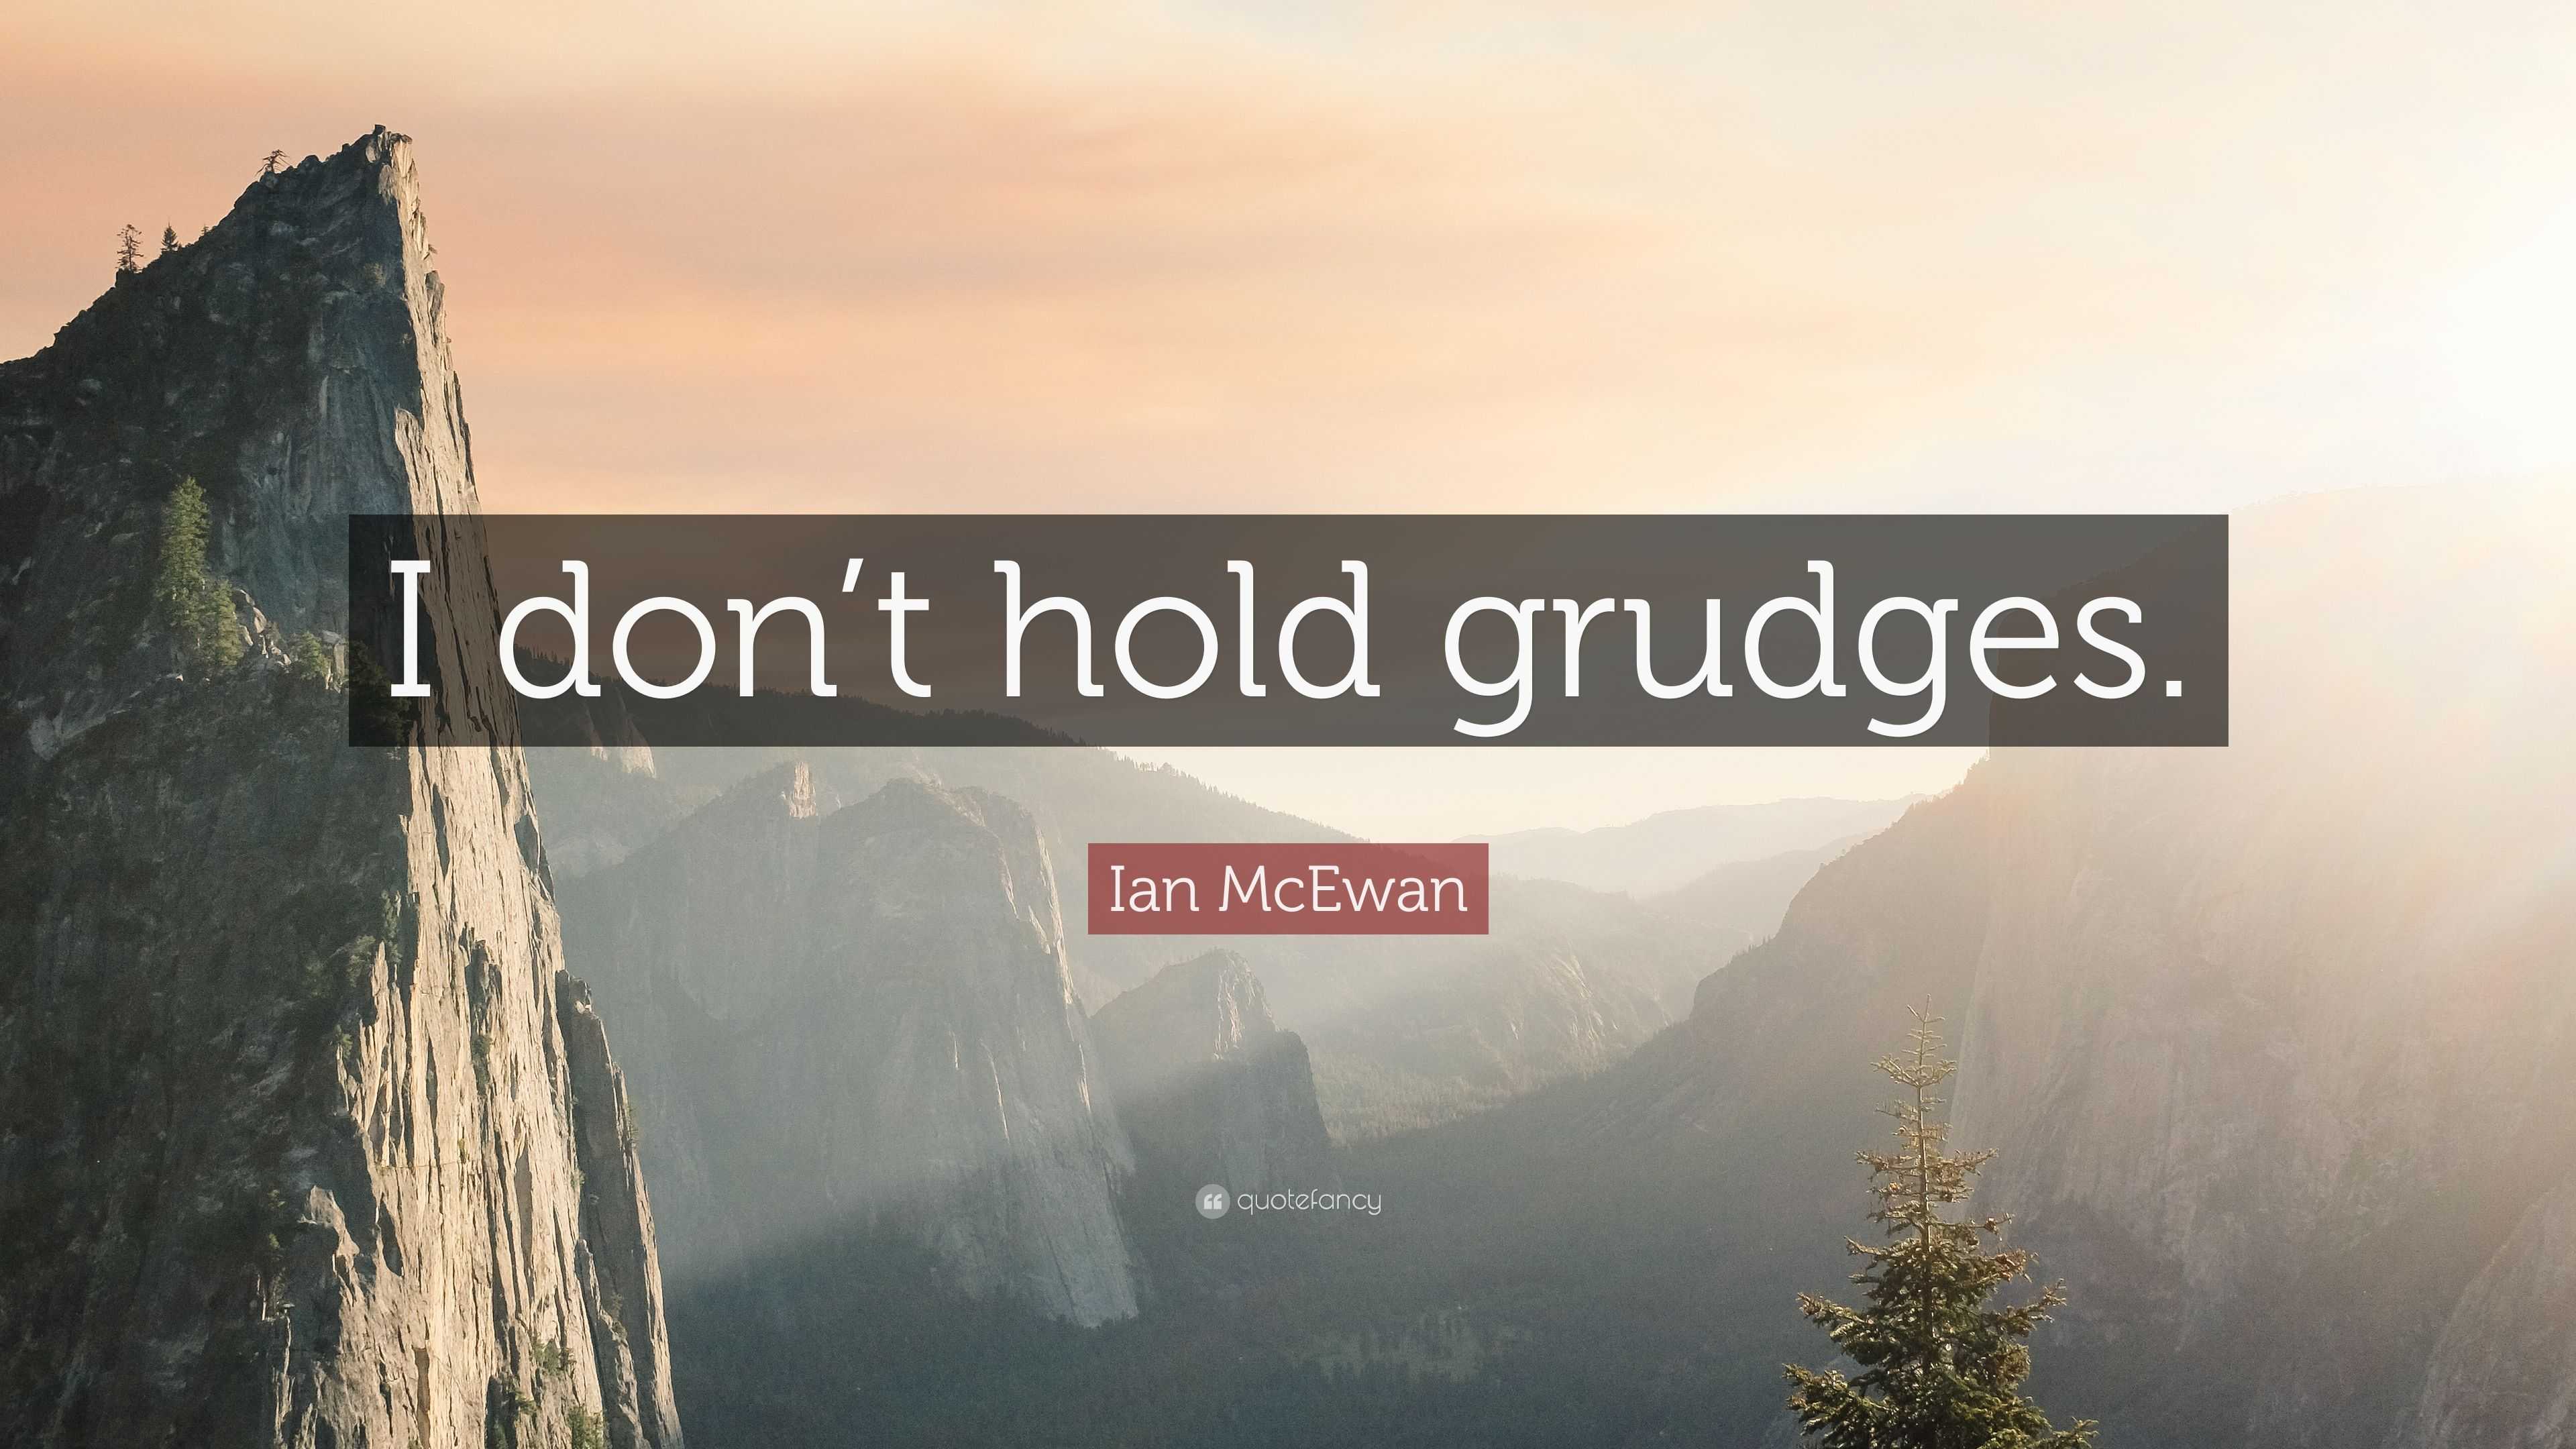 I don’t hold grudges quote